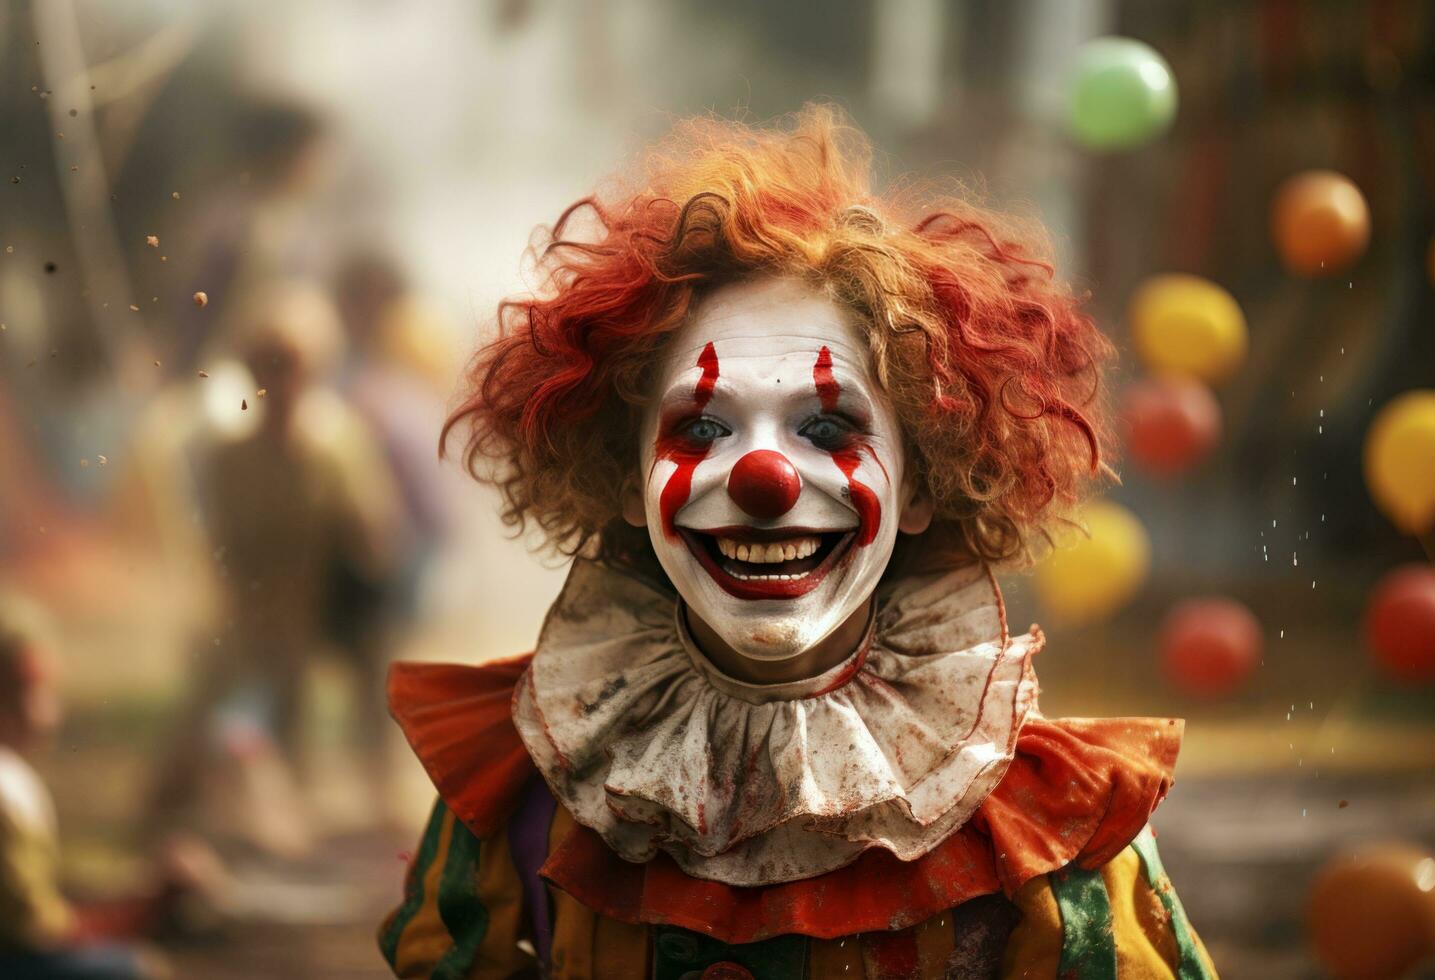 AI generated an image of a happy clown photo